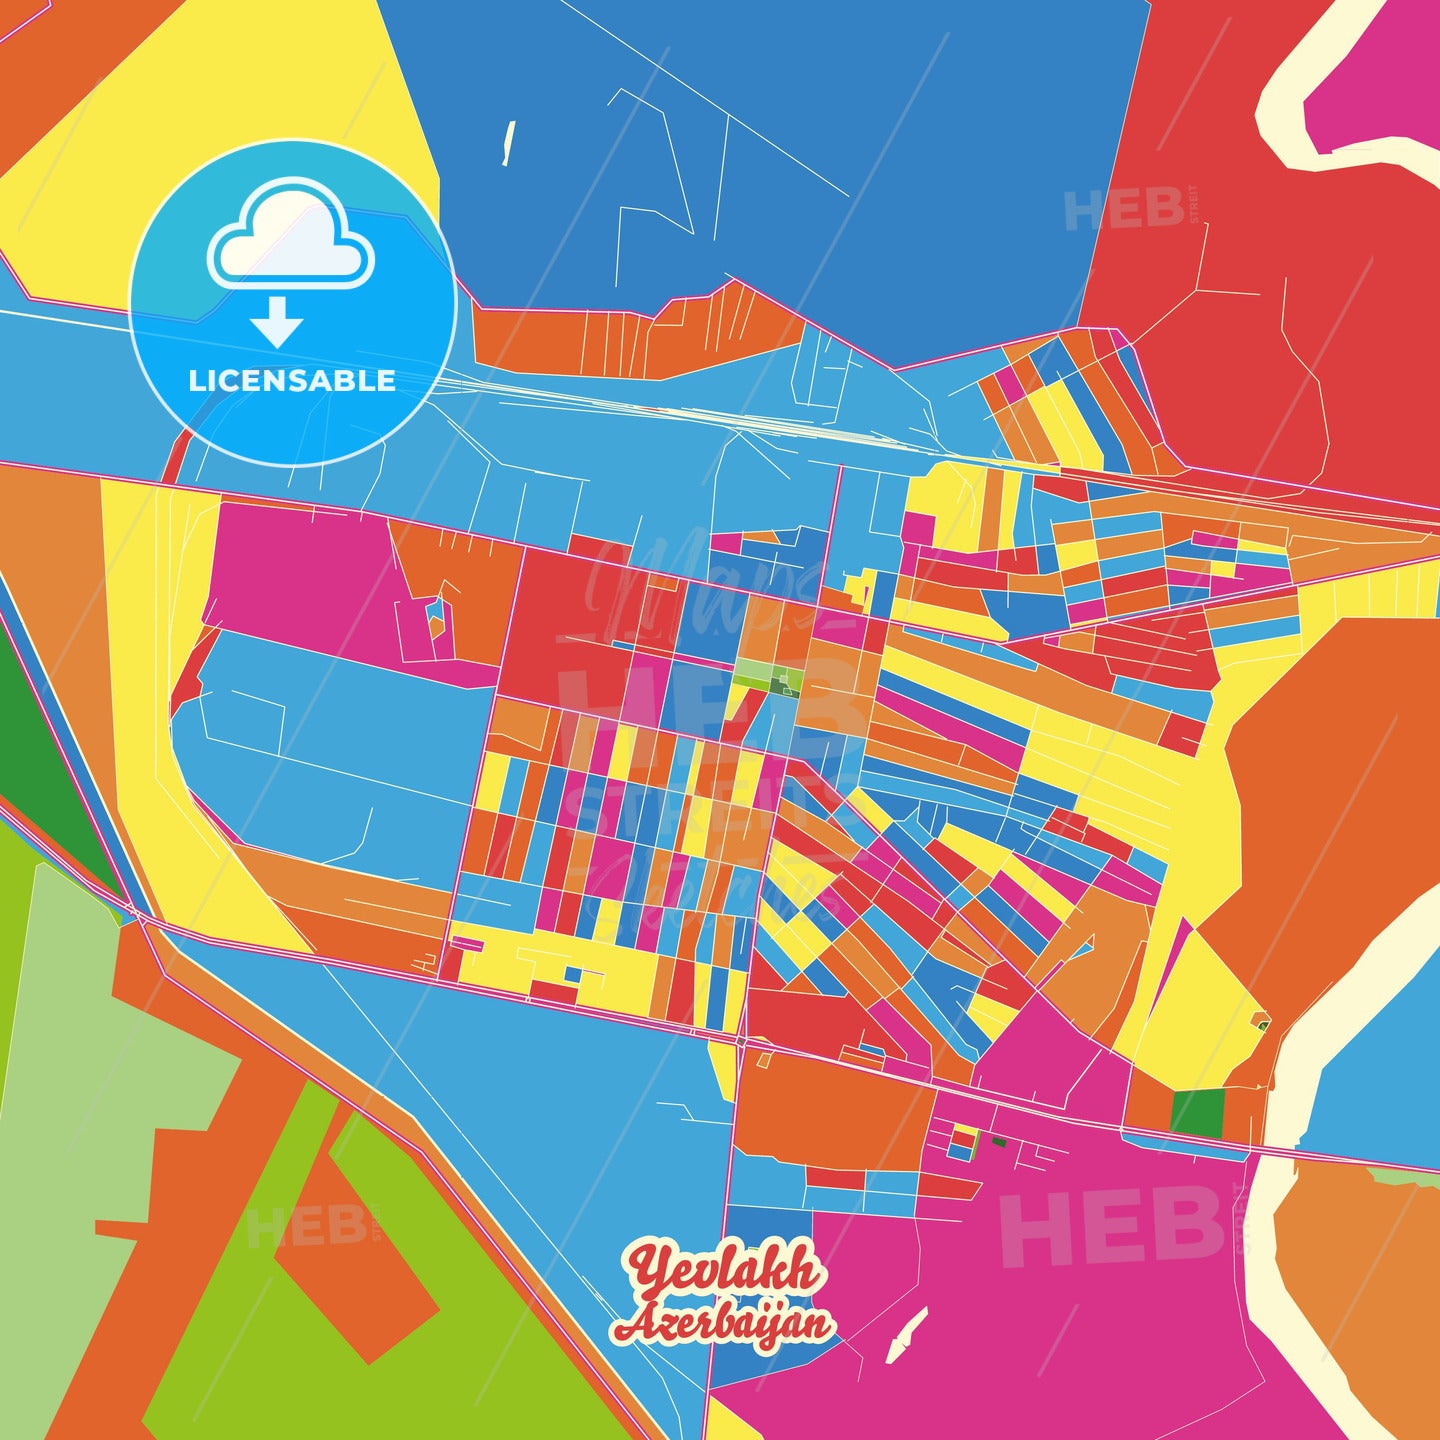 Yevlakh, Azerbaijan Crazy Colorful Street Map Poster Template - HEBSTREITS Sketches